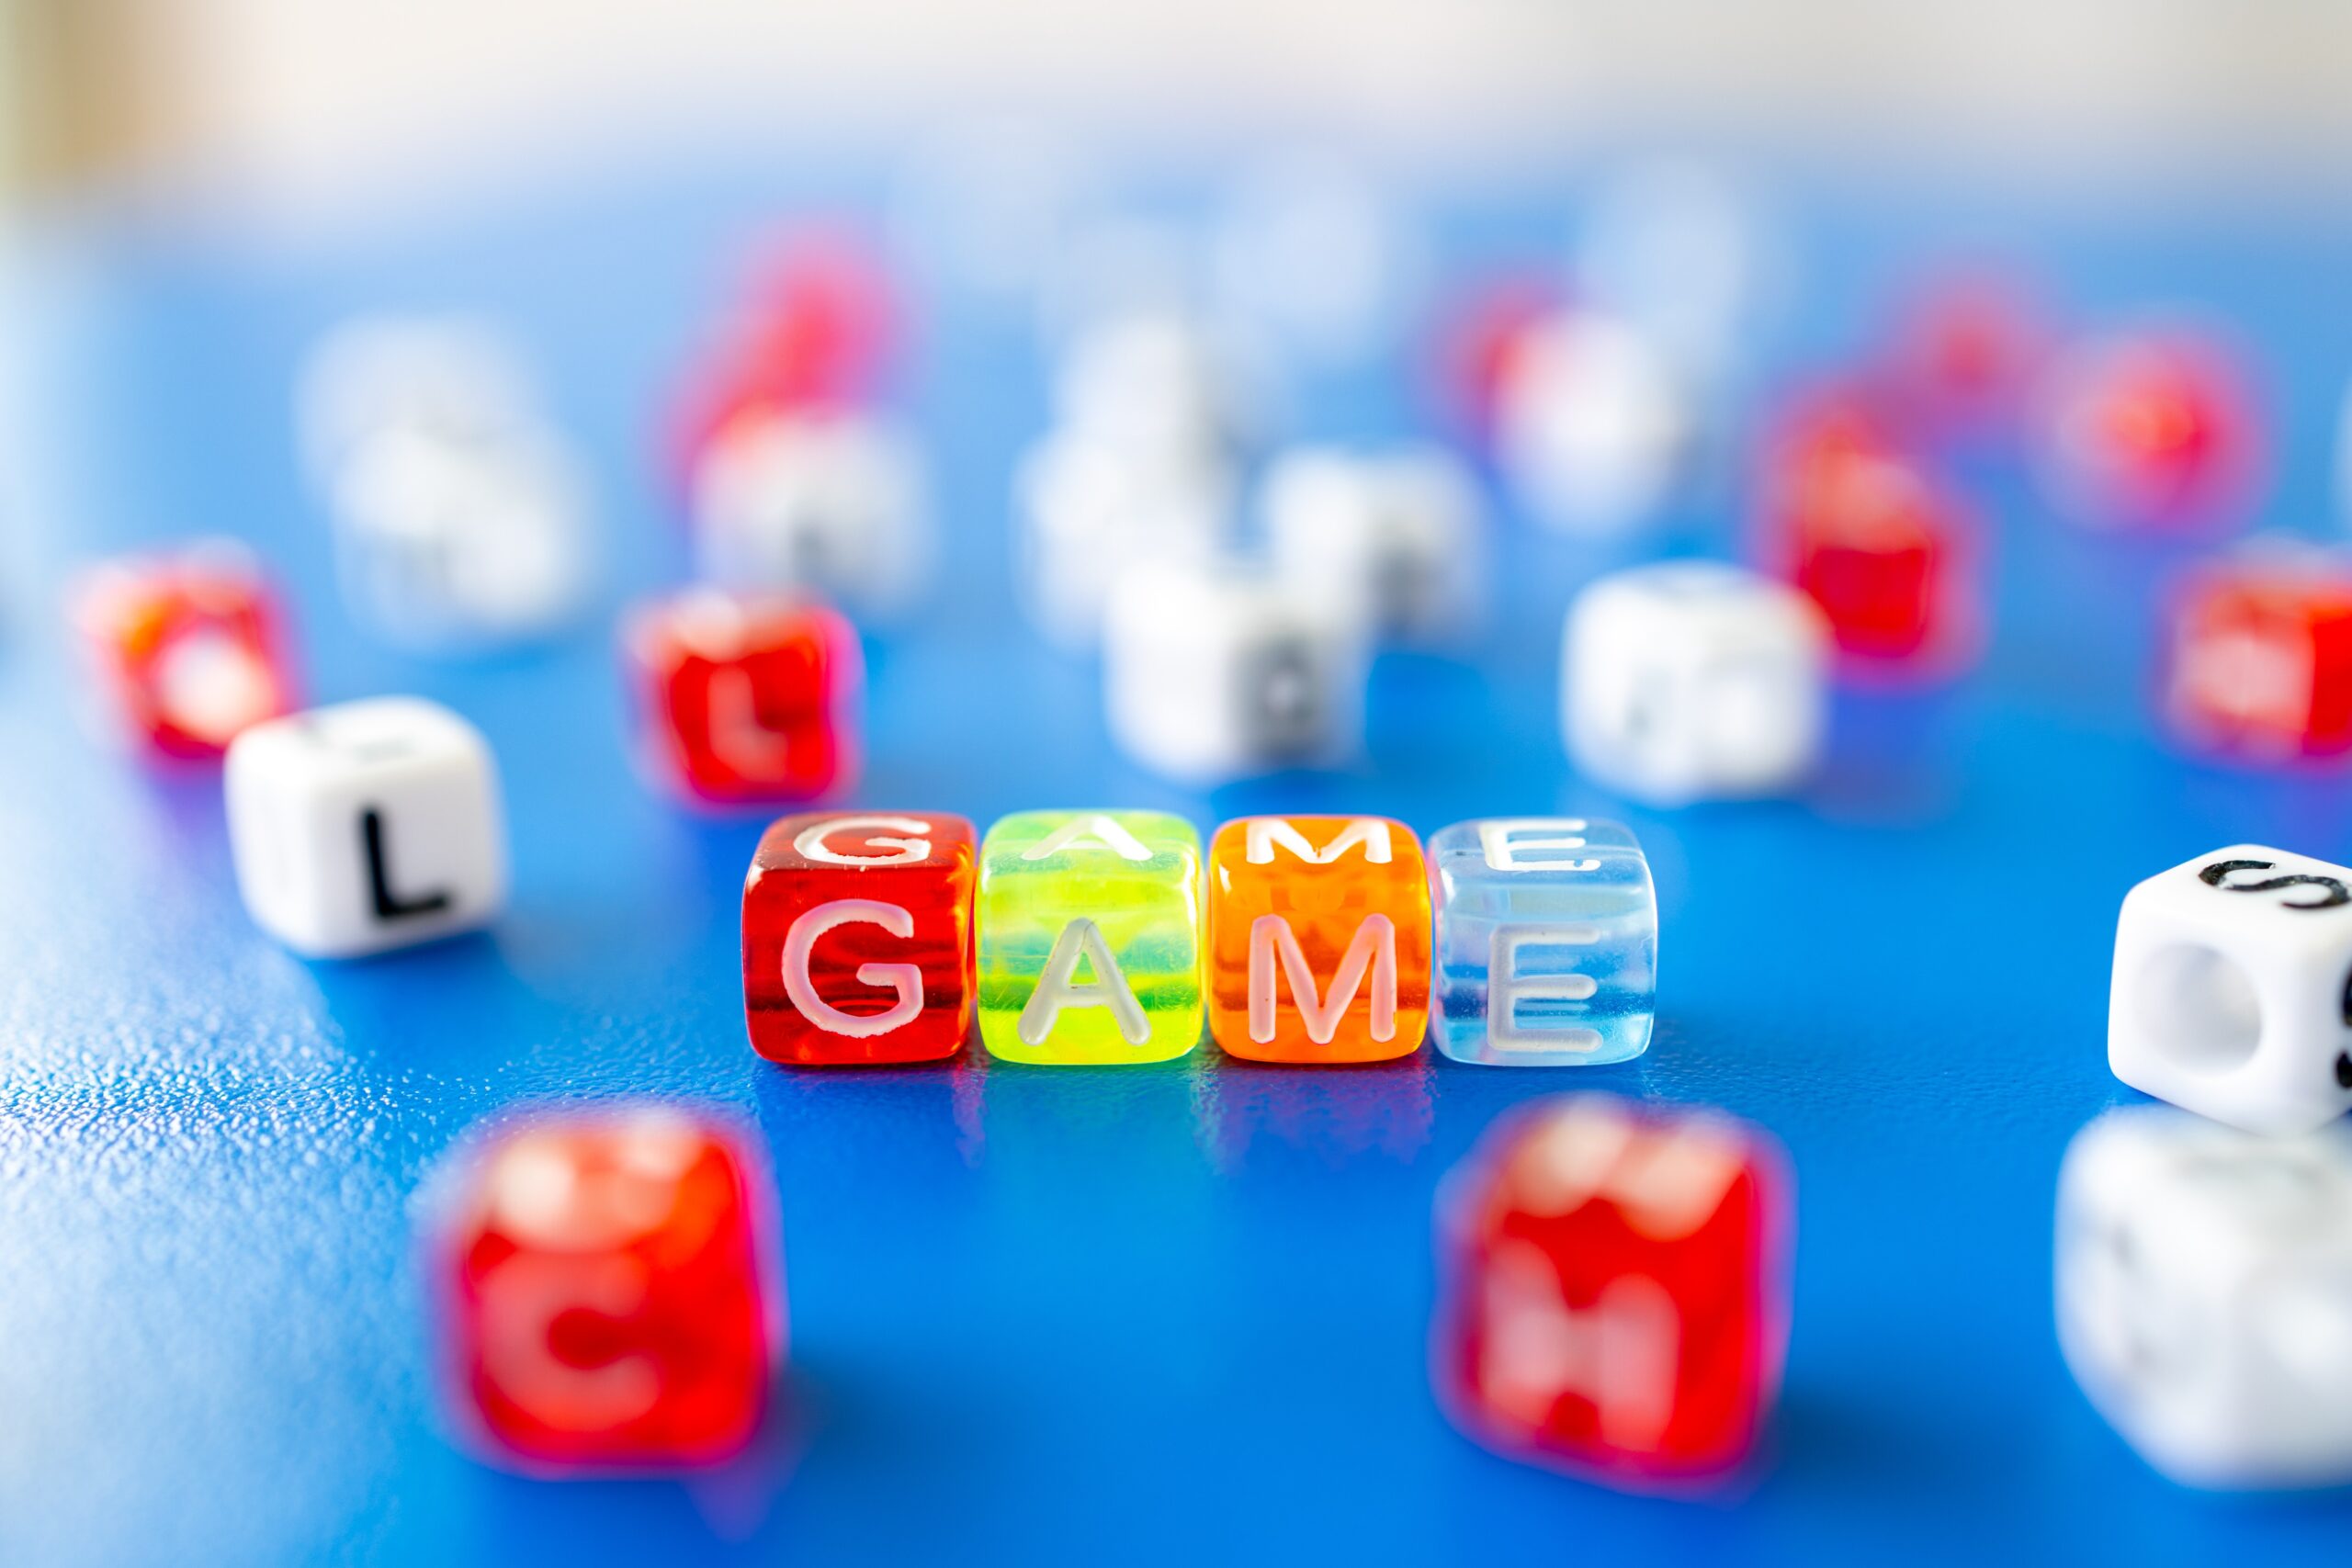 Beads spell out "game".